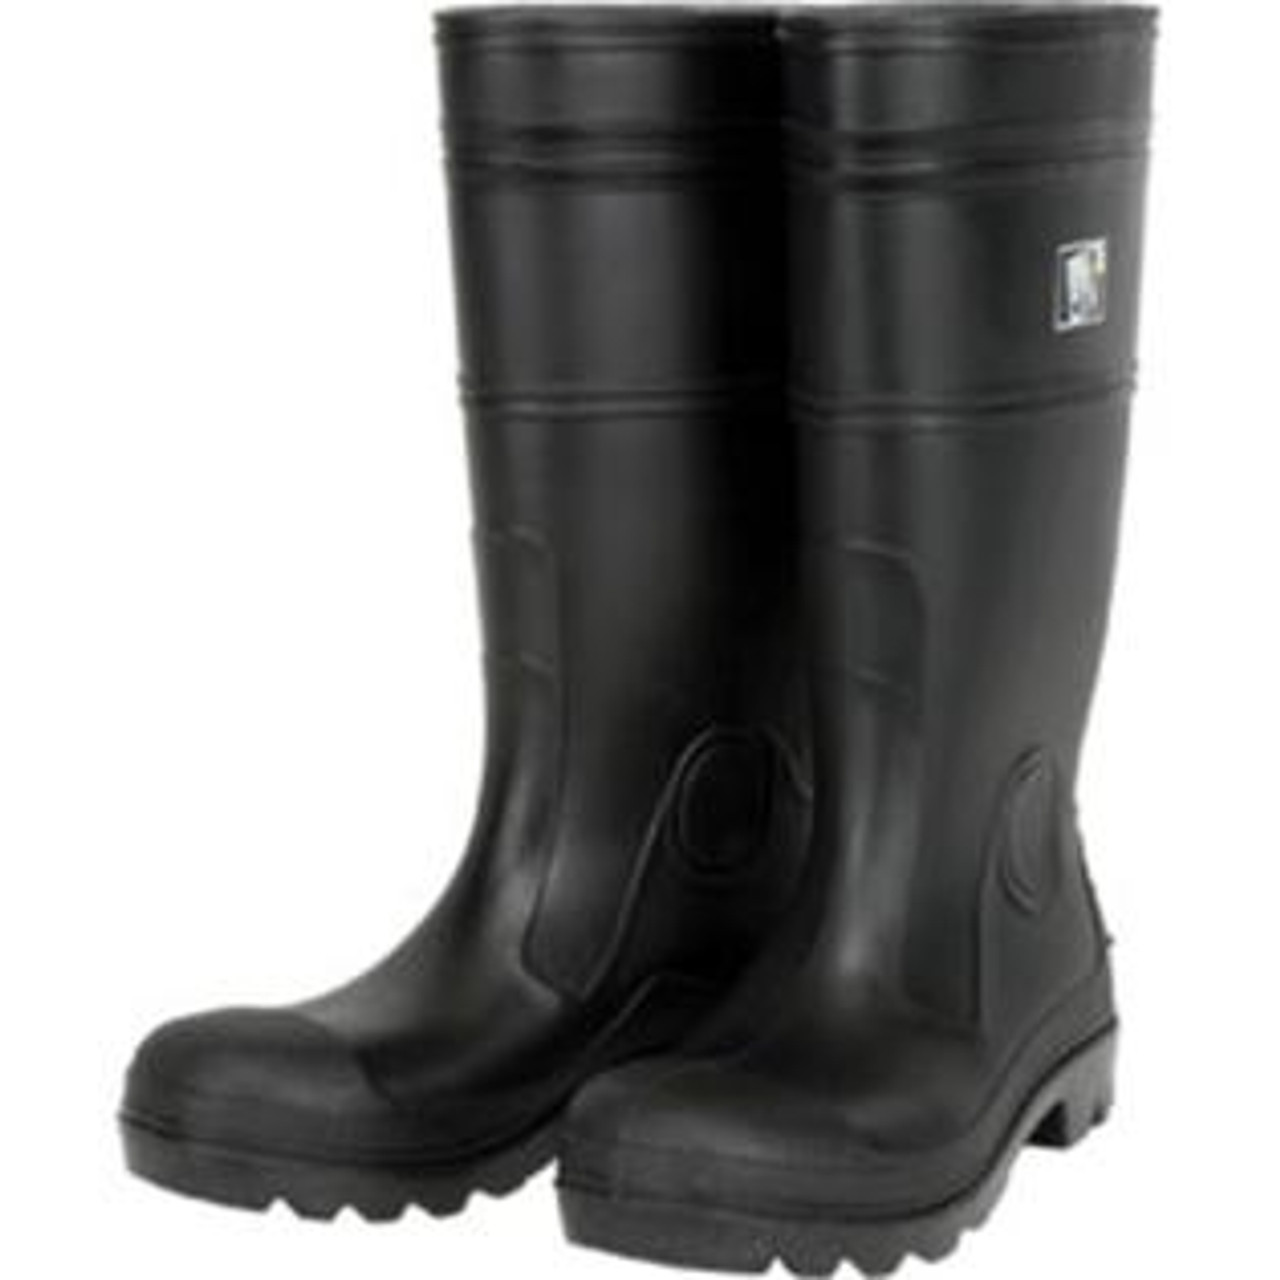 IMPA 190214 PAIR OF RUBBER BOOTS LONG Size 42 (27cm)